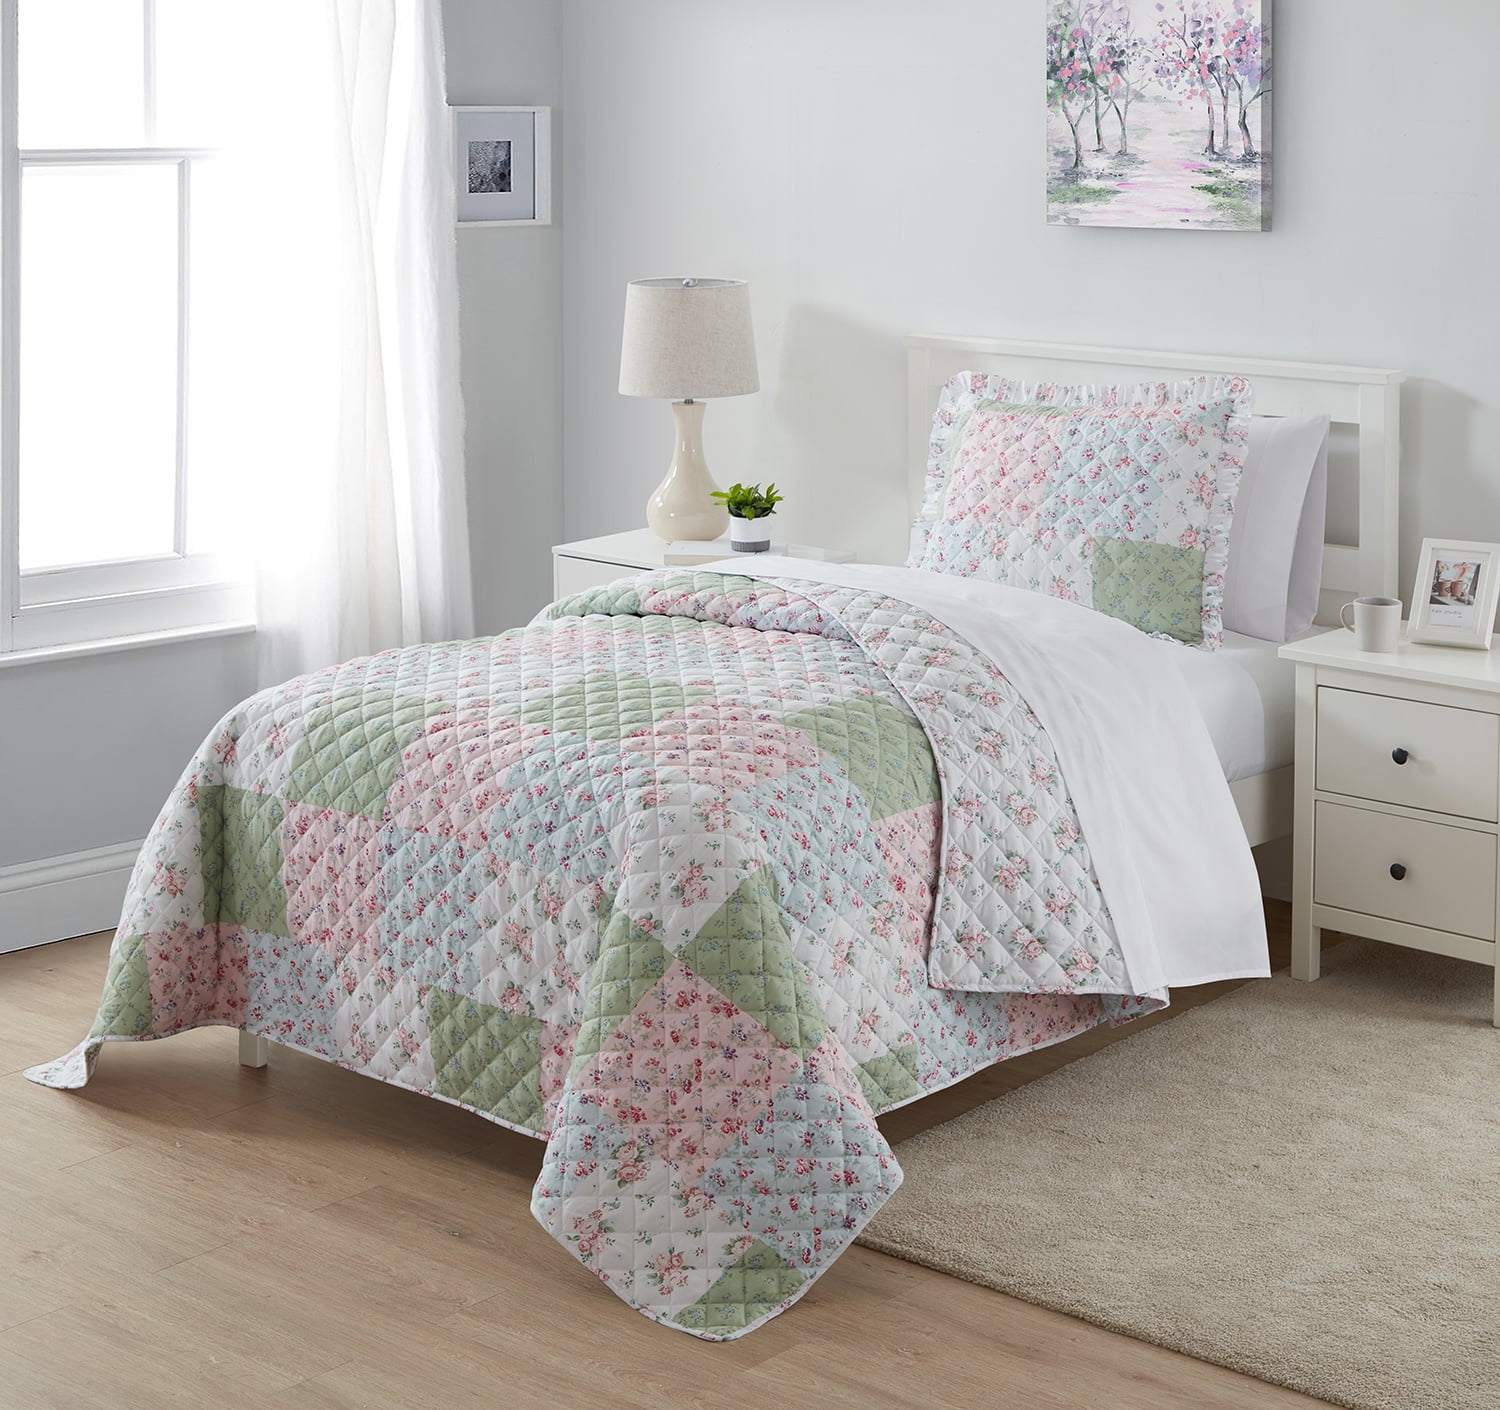 Twin SIMPLY SHABBY CHIC Patchwork DITSY Floral Ruffled Quilt & Sham 